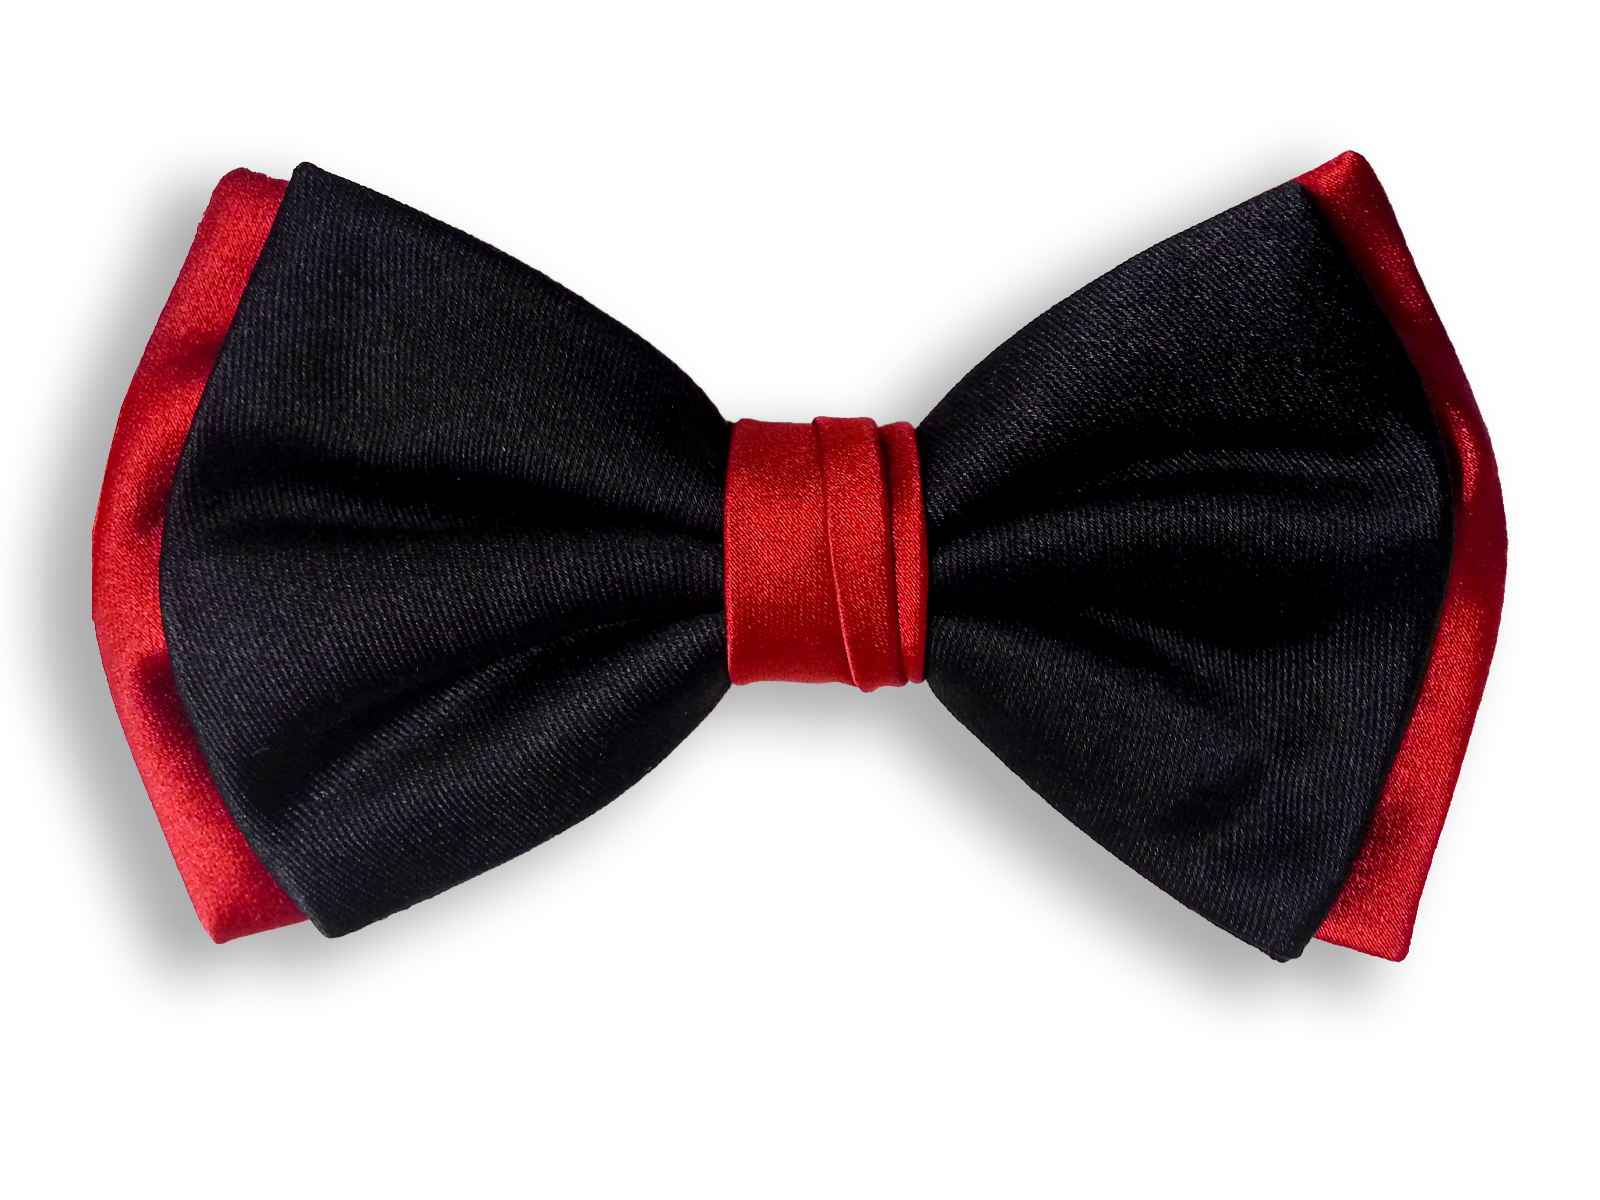 Bow Tie Transparent Background #1463850 (License: Personal Use) .